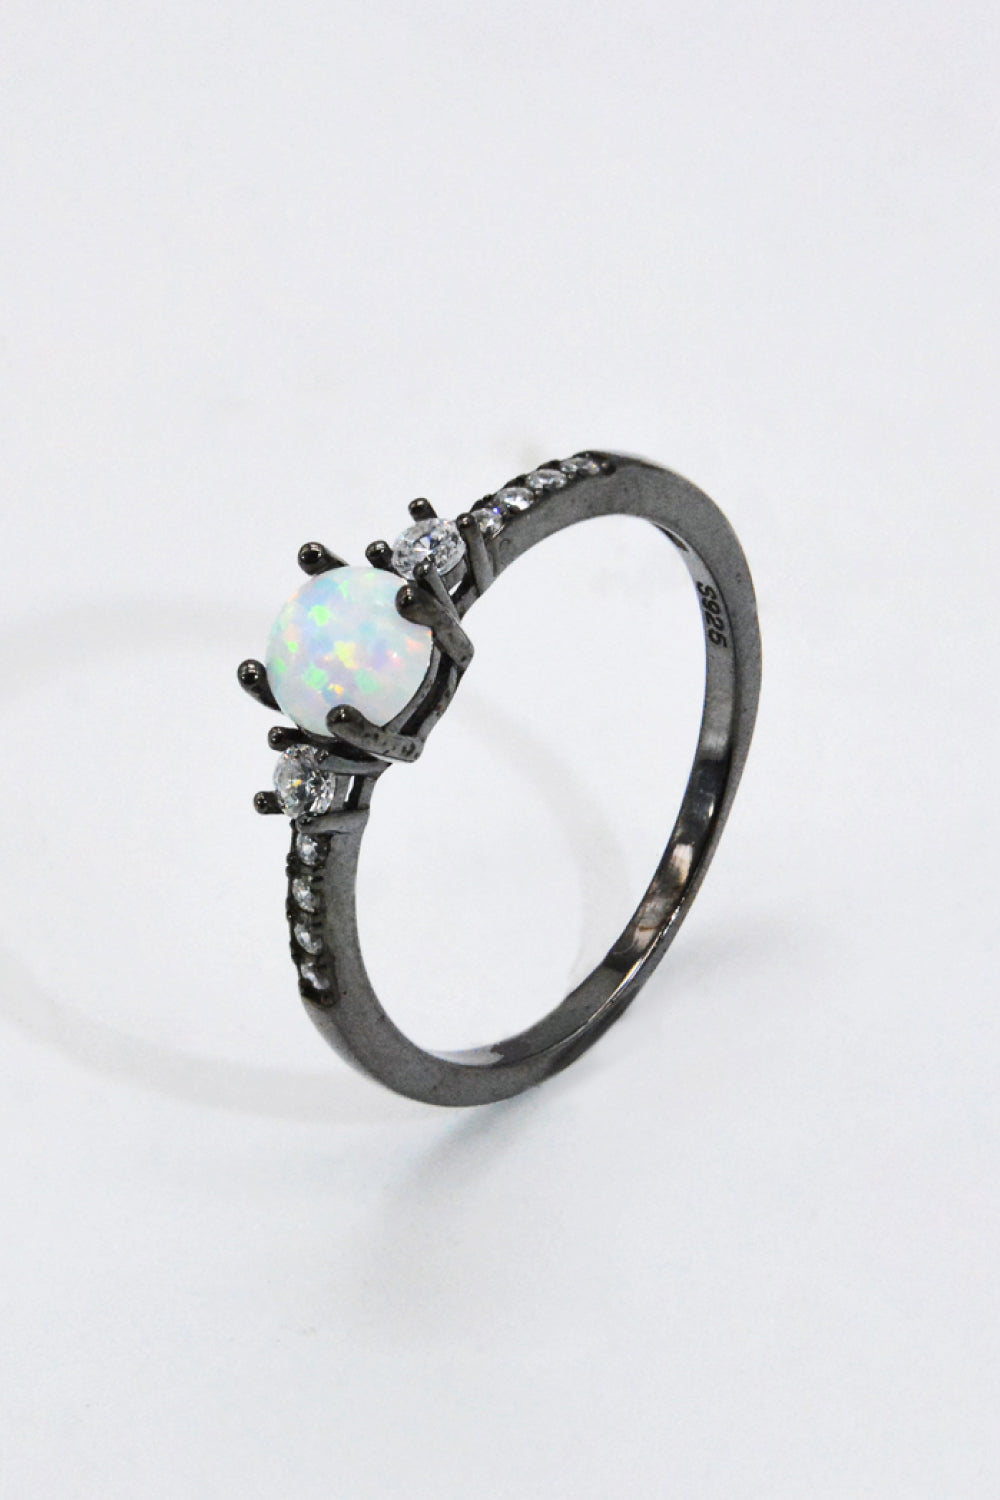 925 Sterling Silver Round Opal Ring - Tophatter Shopping Deals - Electronics, Jewelry, Auction, App, Bidding, Gadgets, Fashion